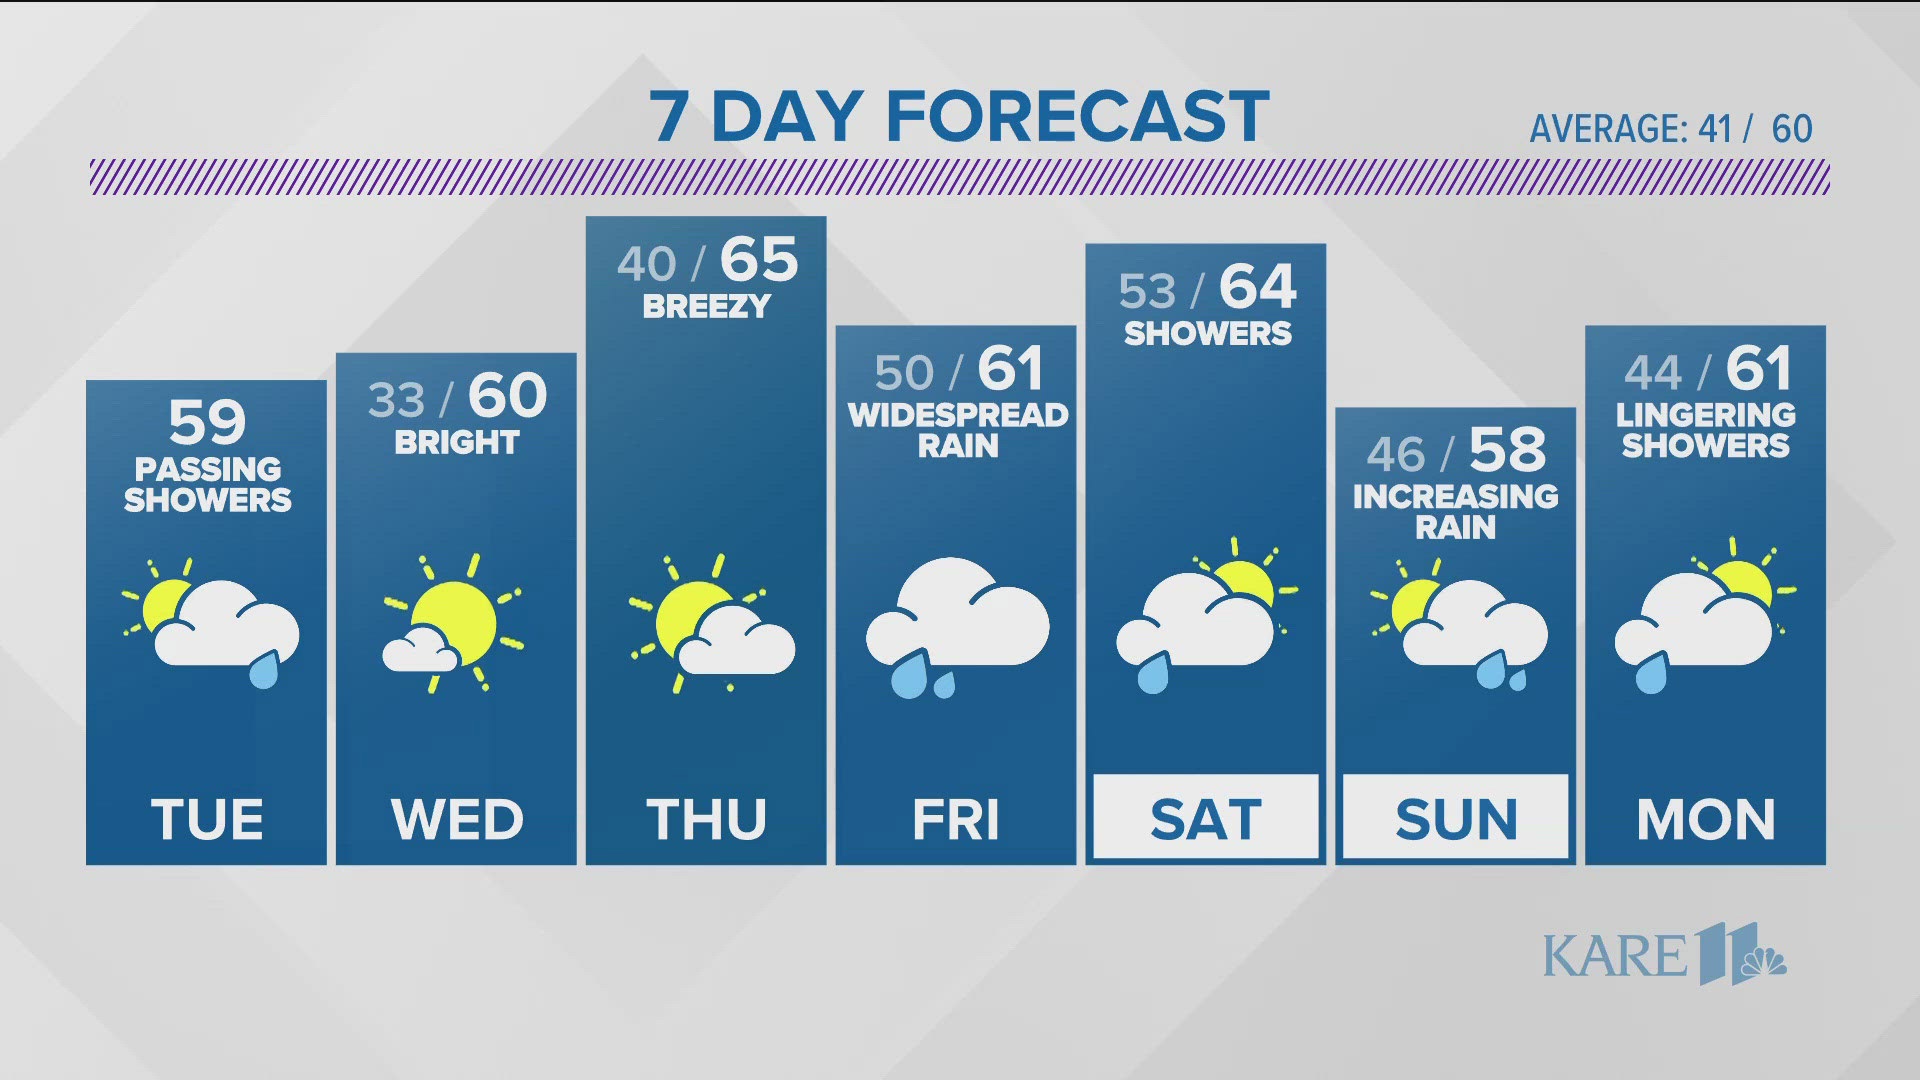 Besides a few showers on Tuesday, the heavy rain holds off until Friday.